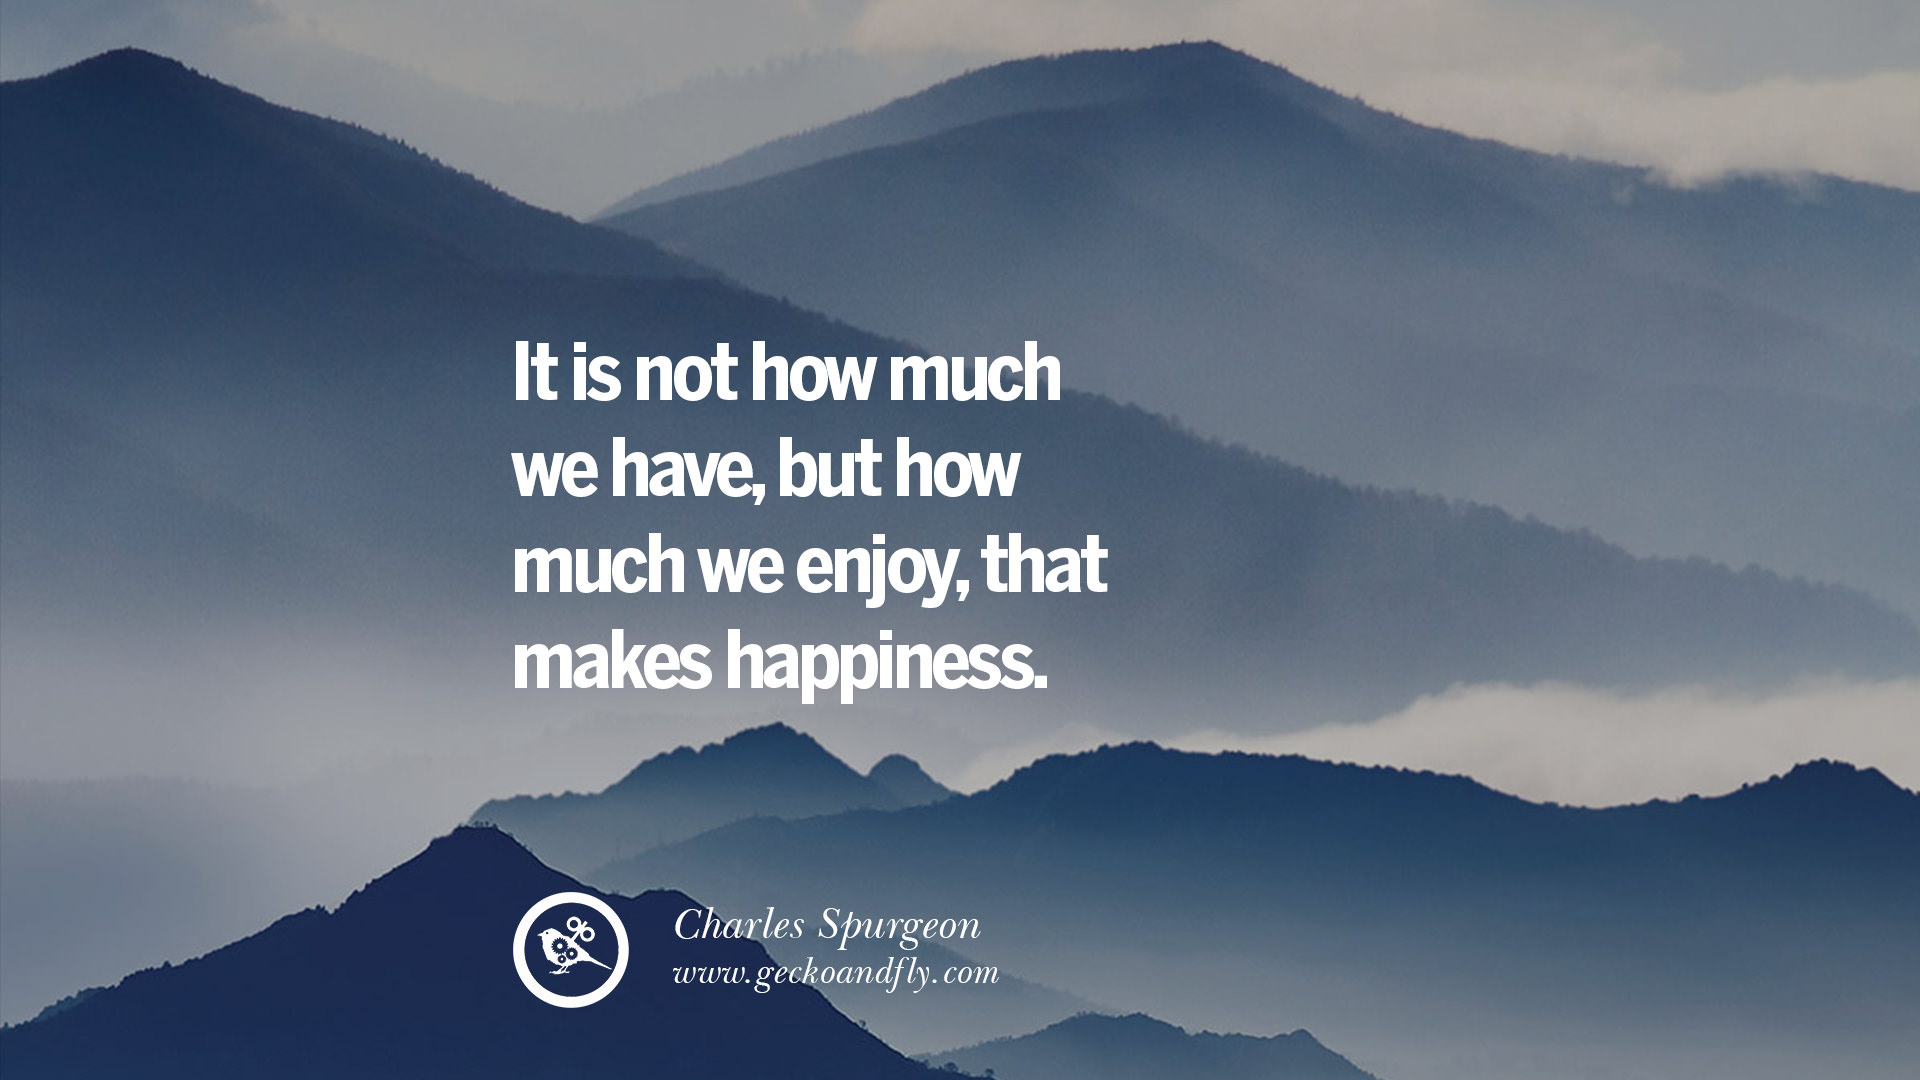 21 Quotes about Pursuit of Happiness to Change Your Thinking